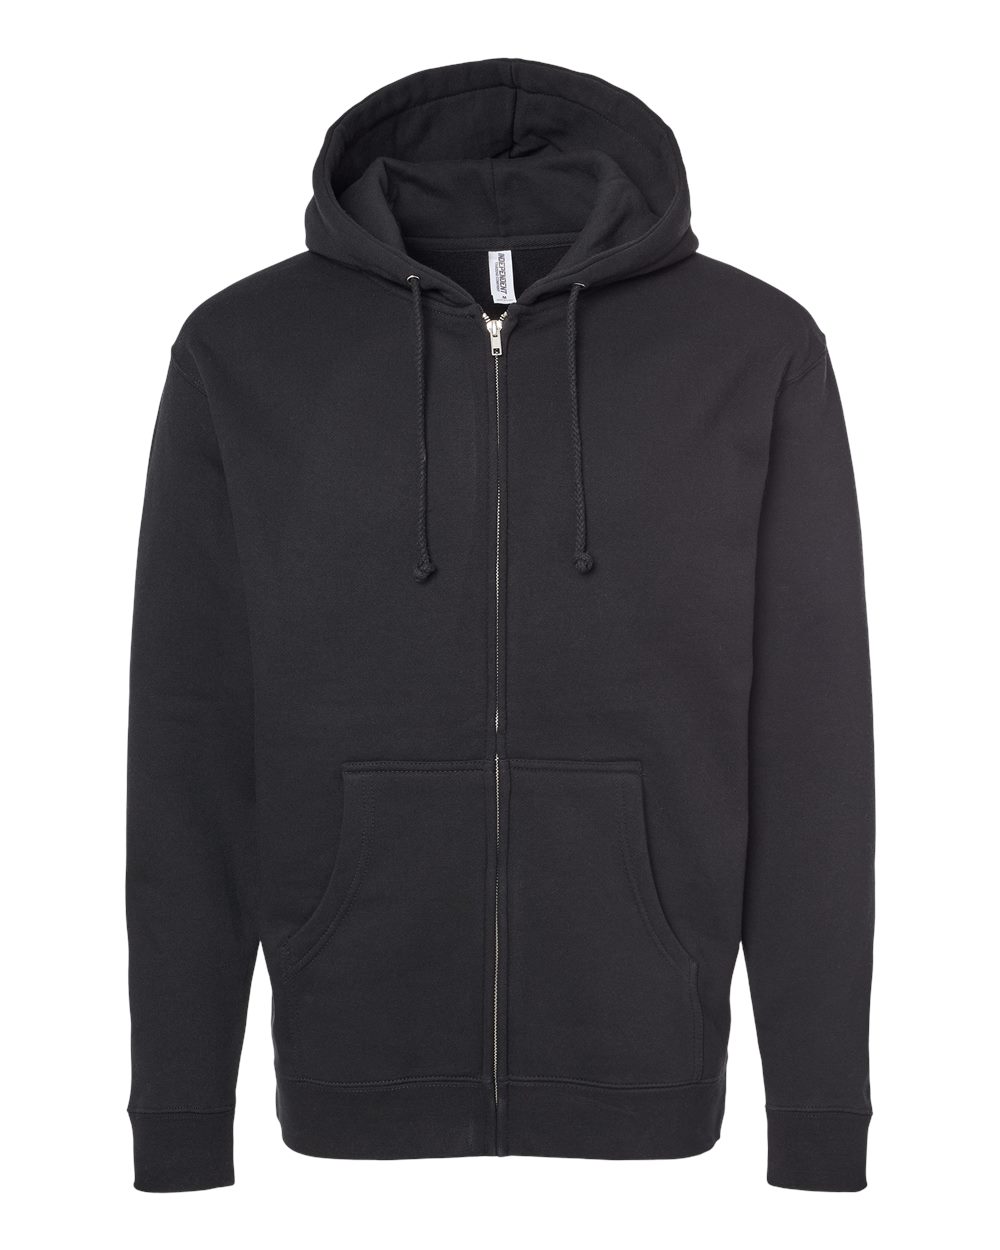 Independent Trading Co. IND4000Z Full-Zip Hooded Sweatshirt 3XL Black